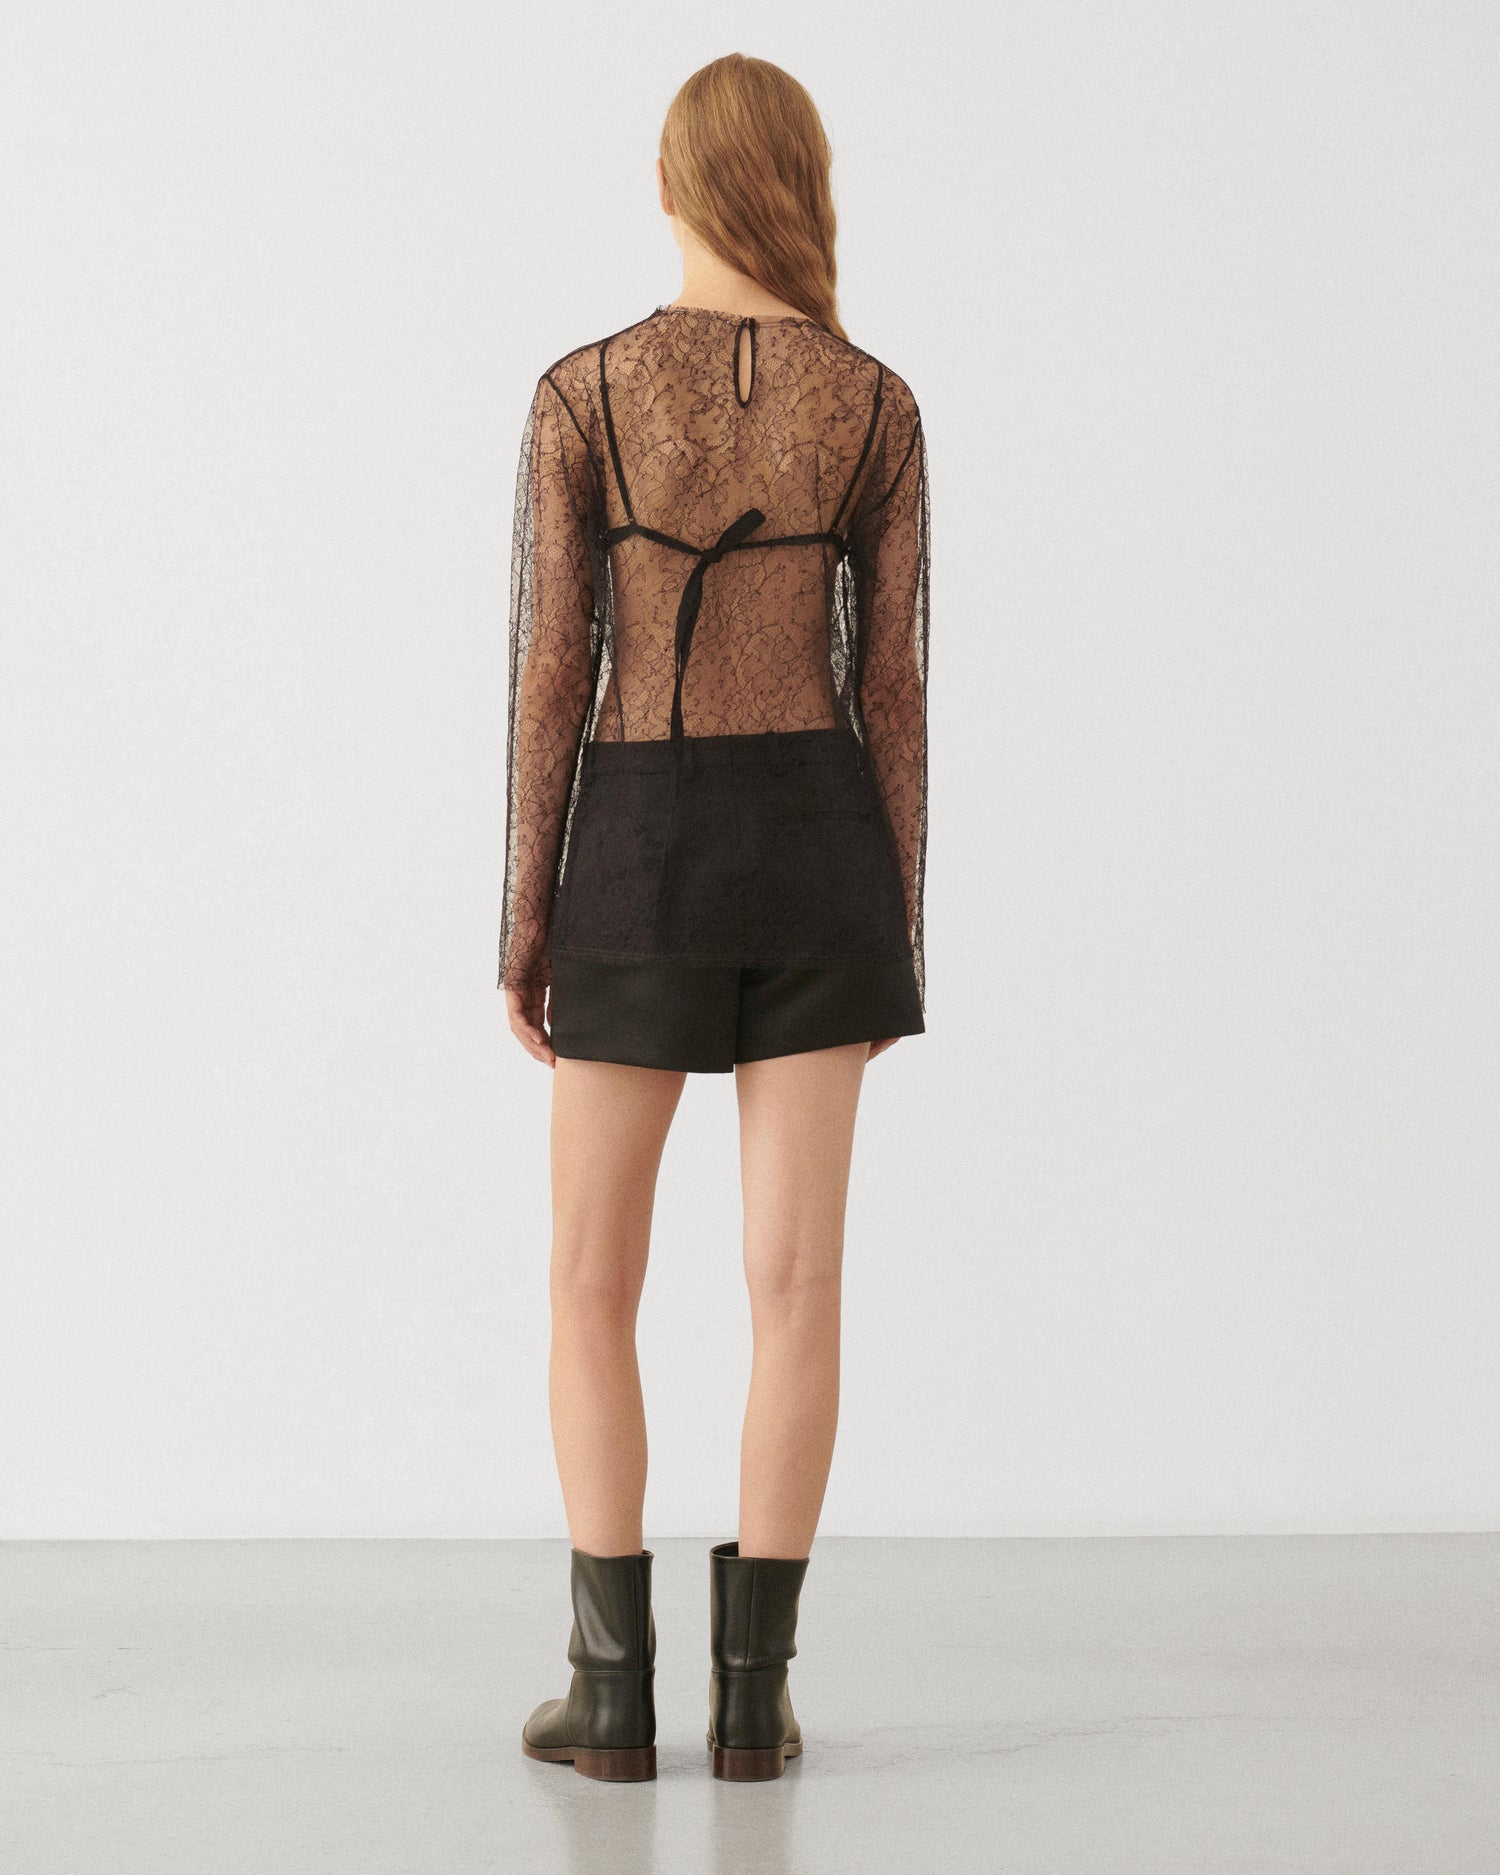 Isabel Tee in Lace, Black